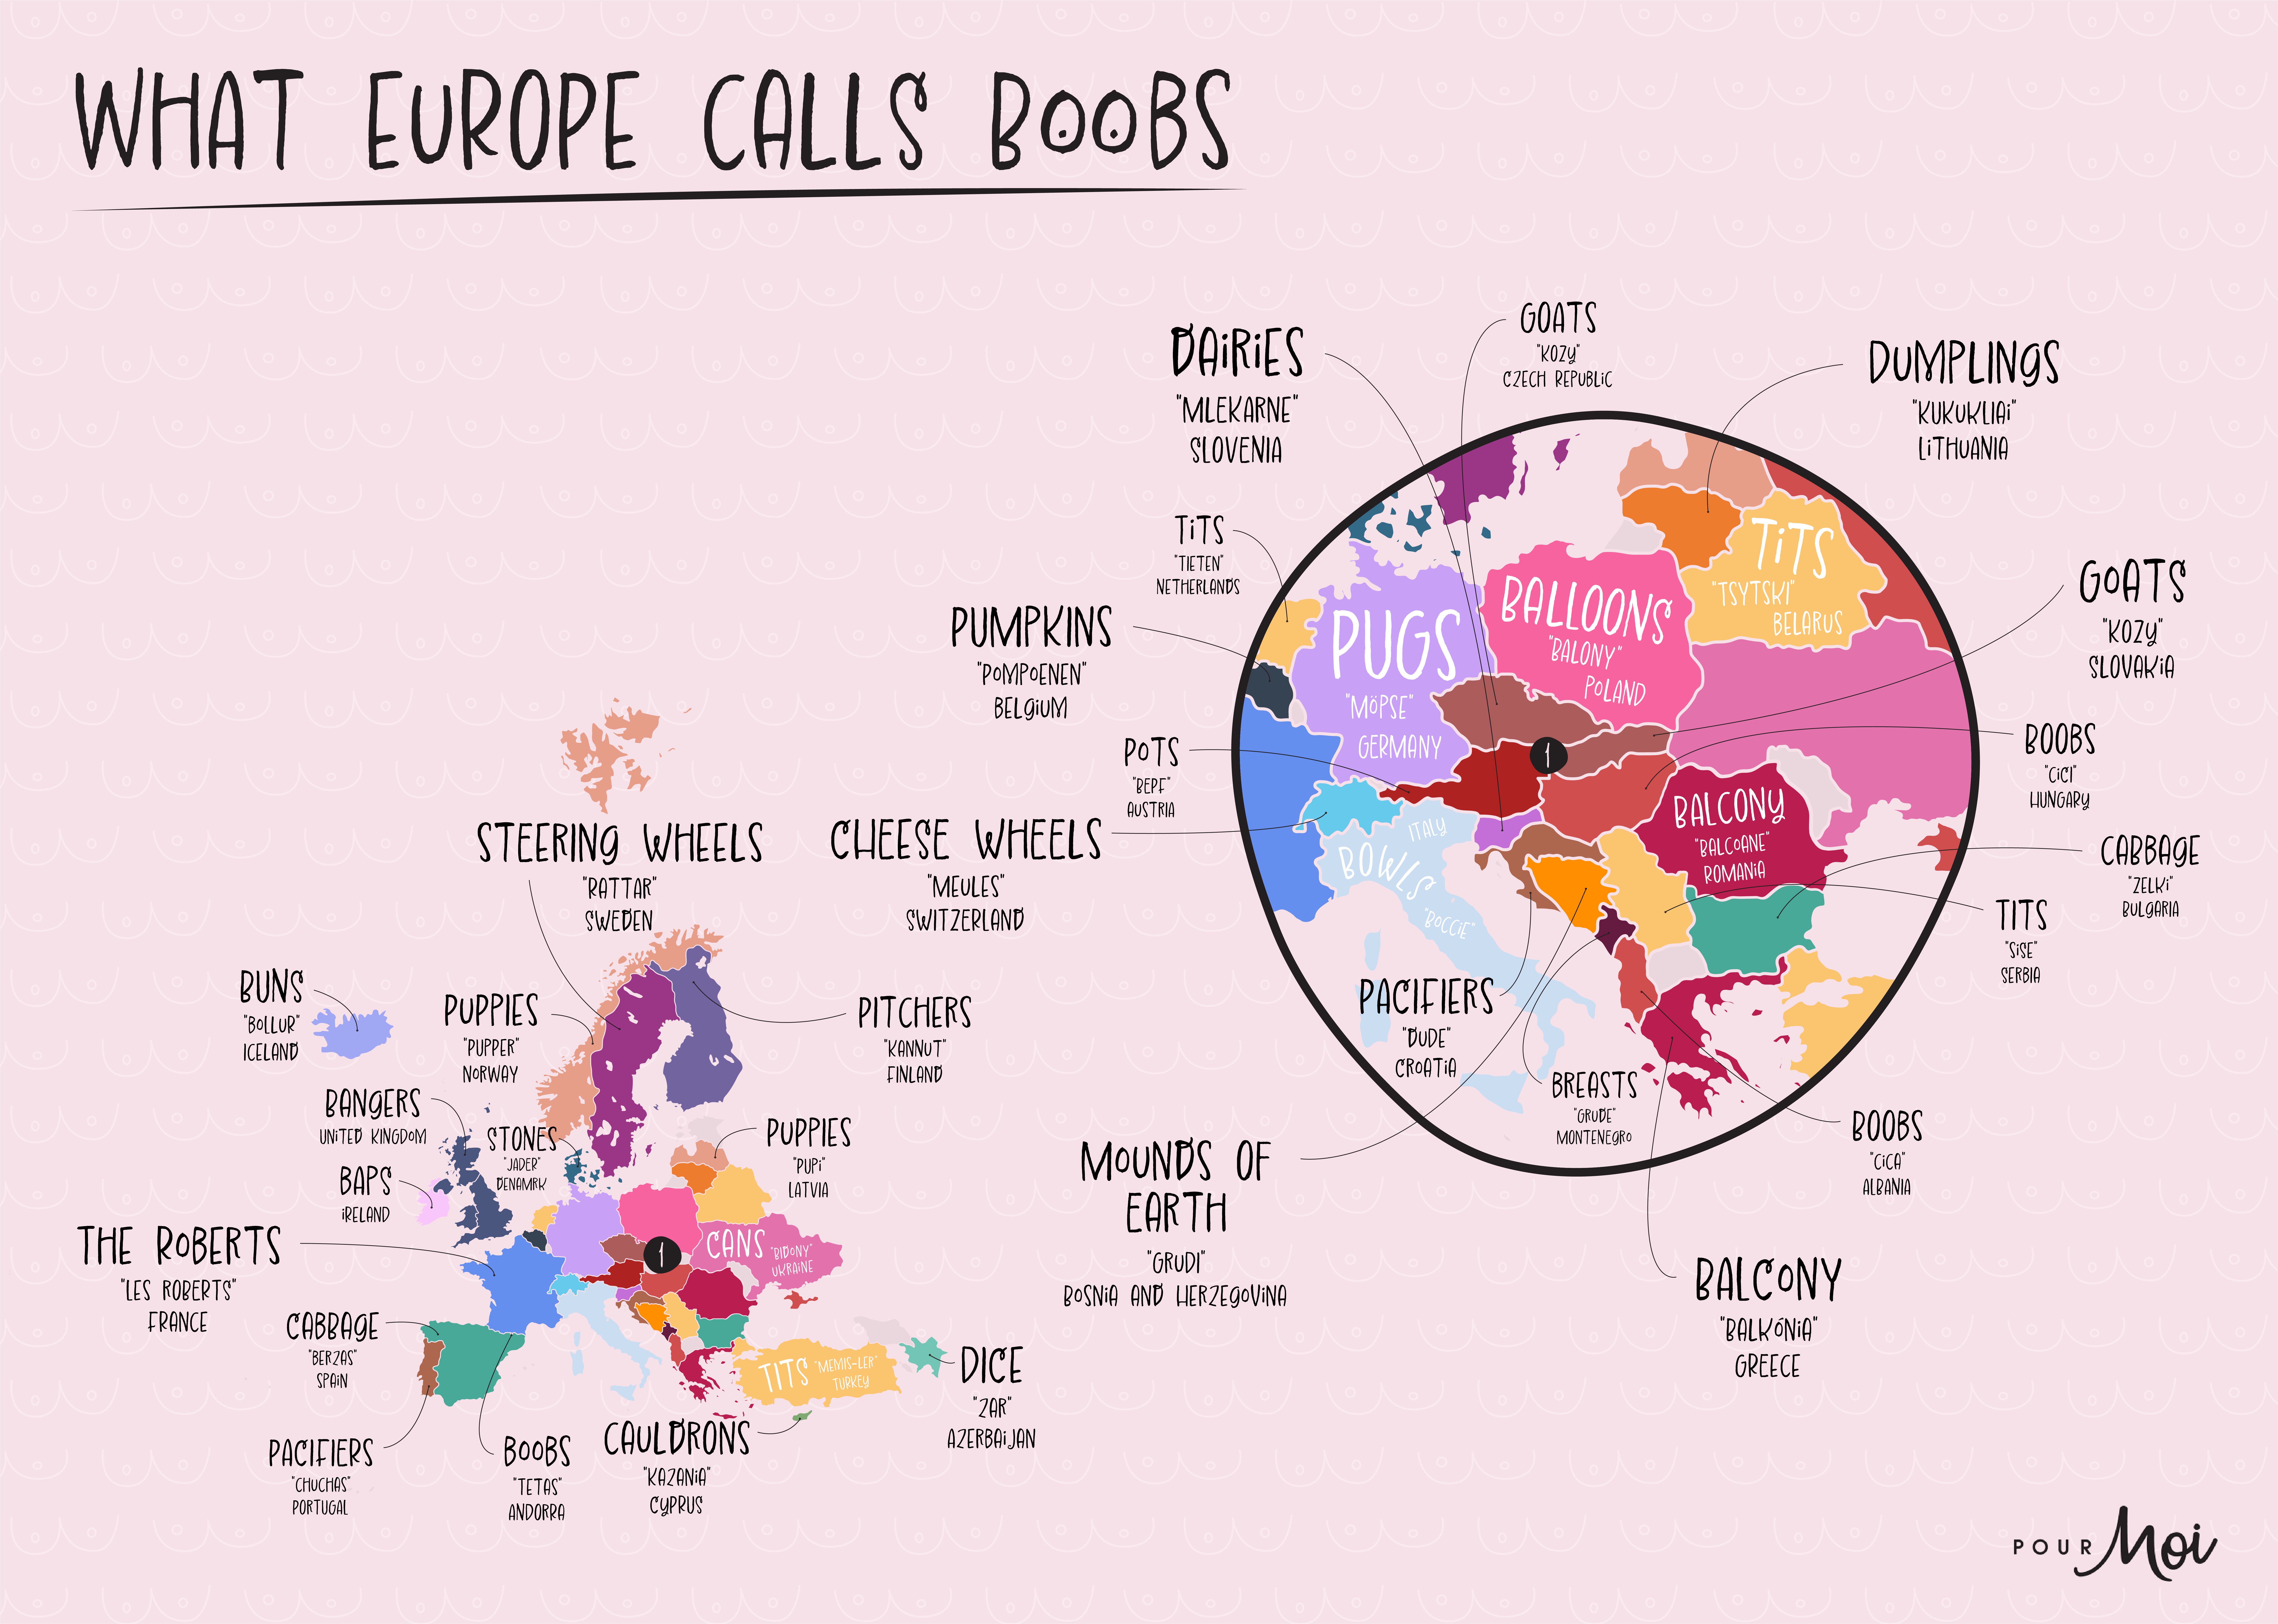 The Word For Boobs Around The World